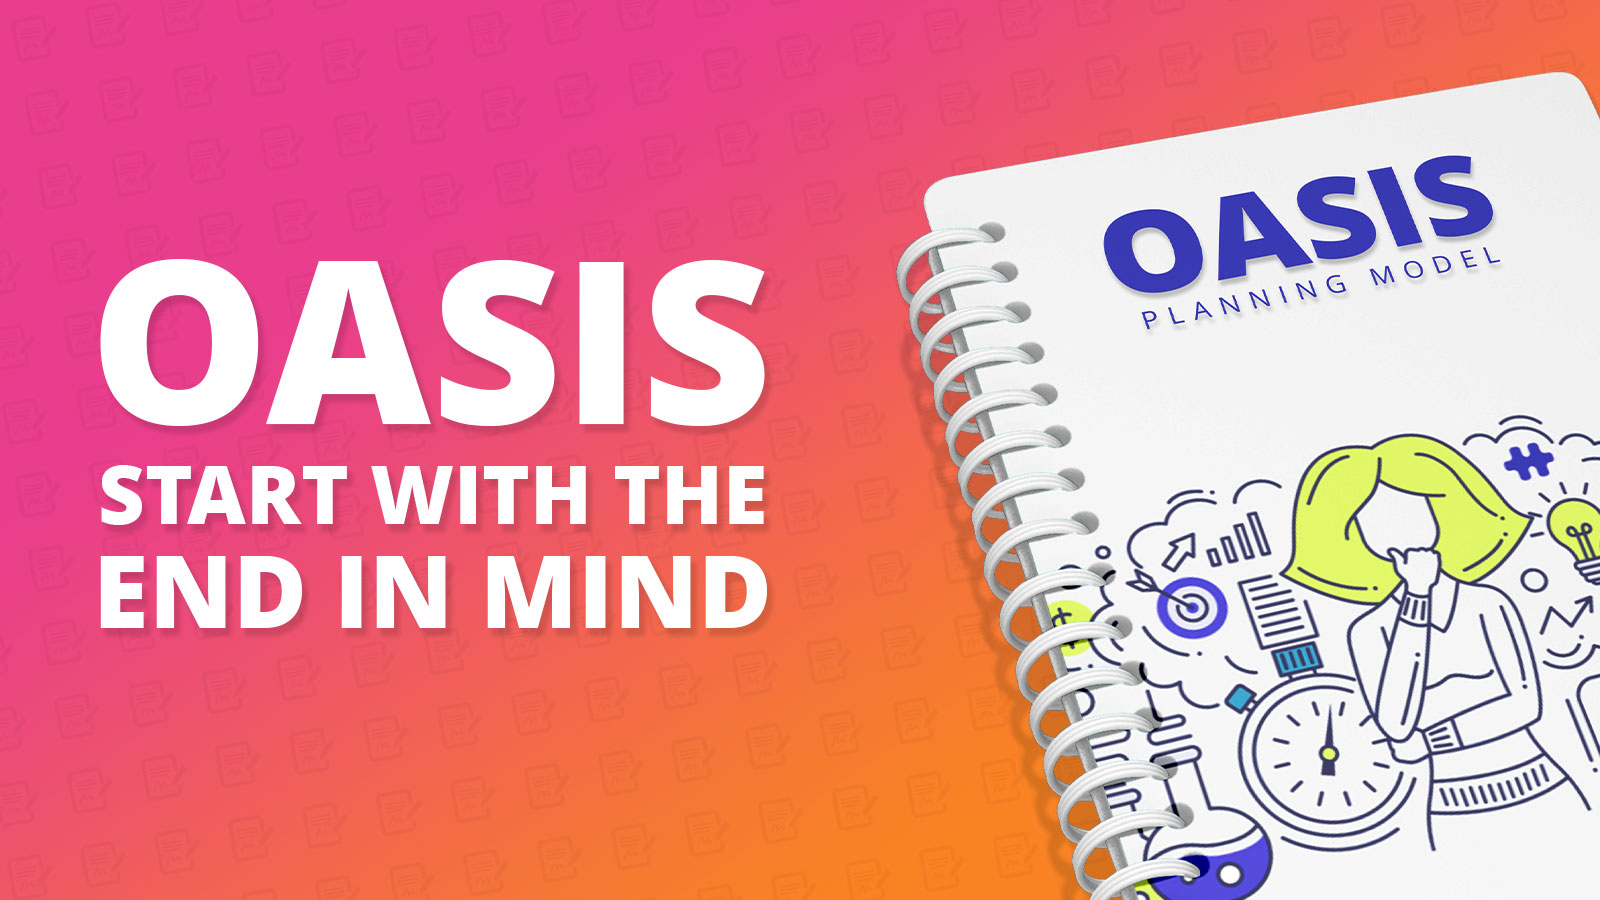 OASIS campaign planning: Start with the end in mind